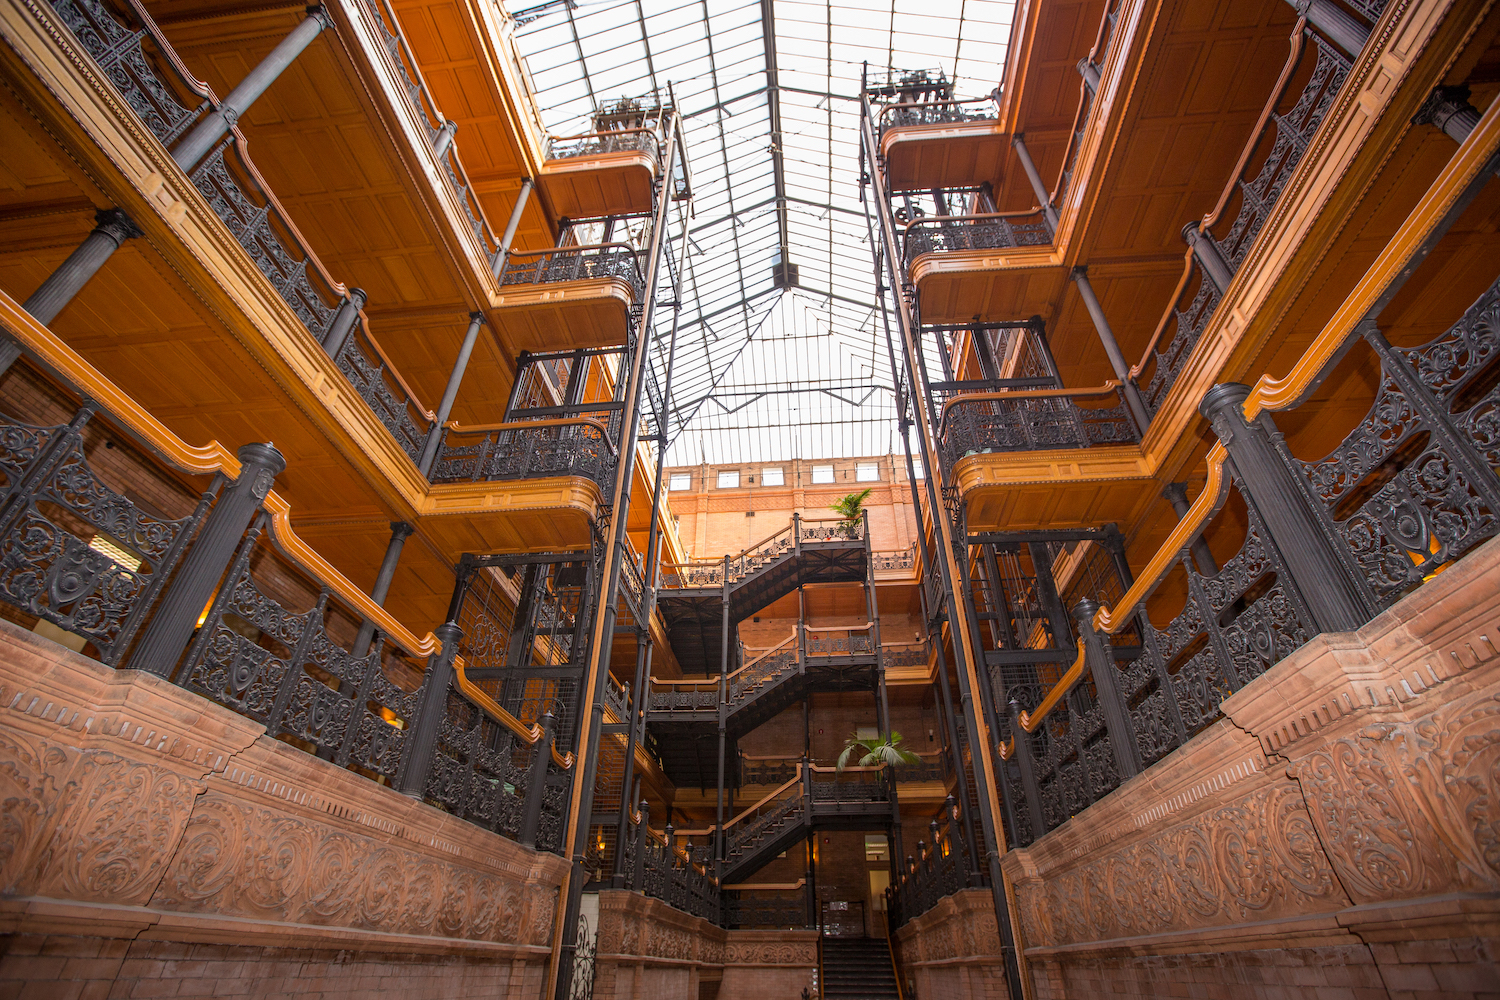 The inside of the Bradbury Building in downtown Los Angeles, just one of the city's architectural marvels